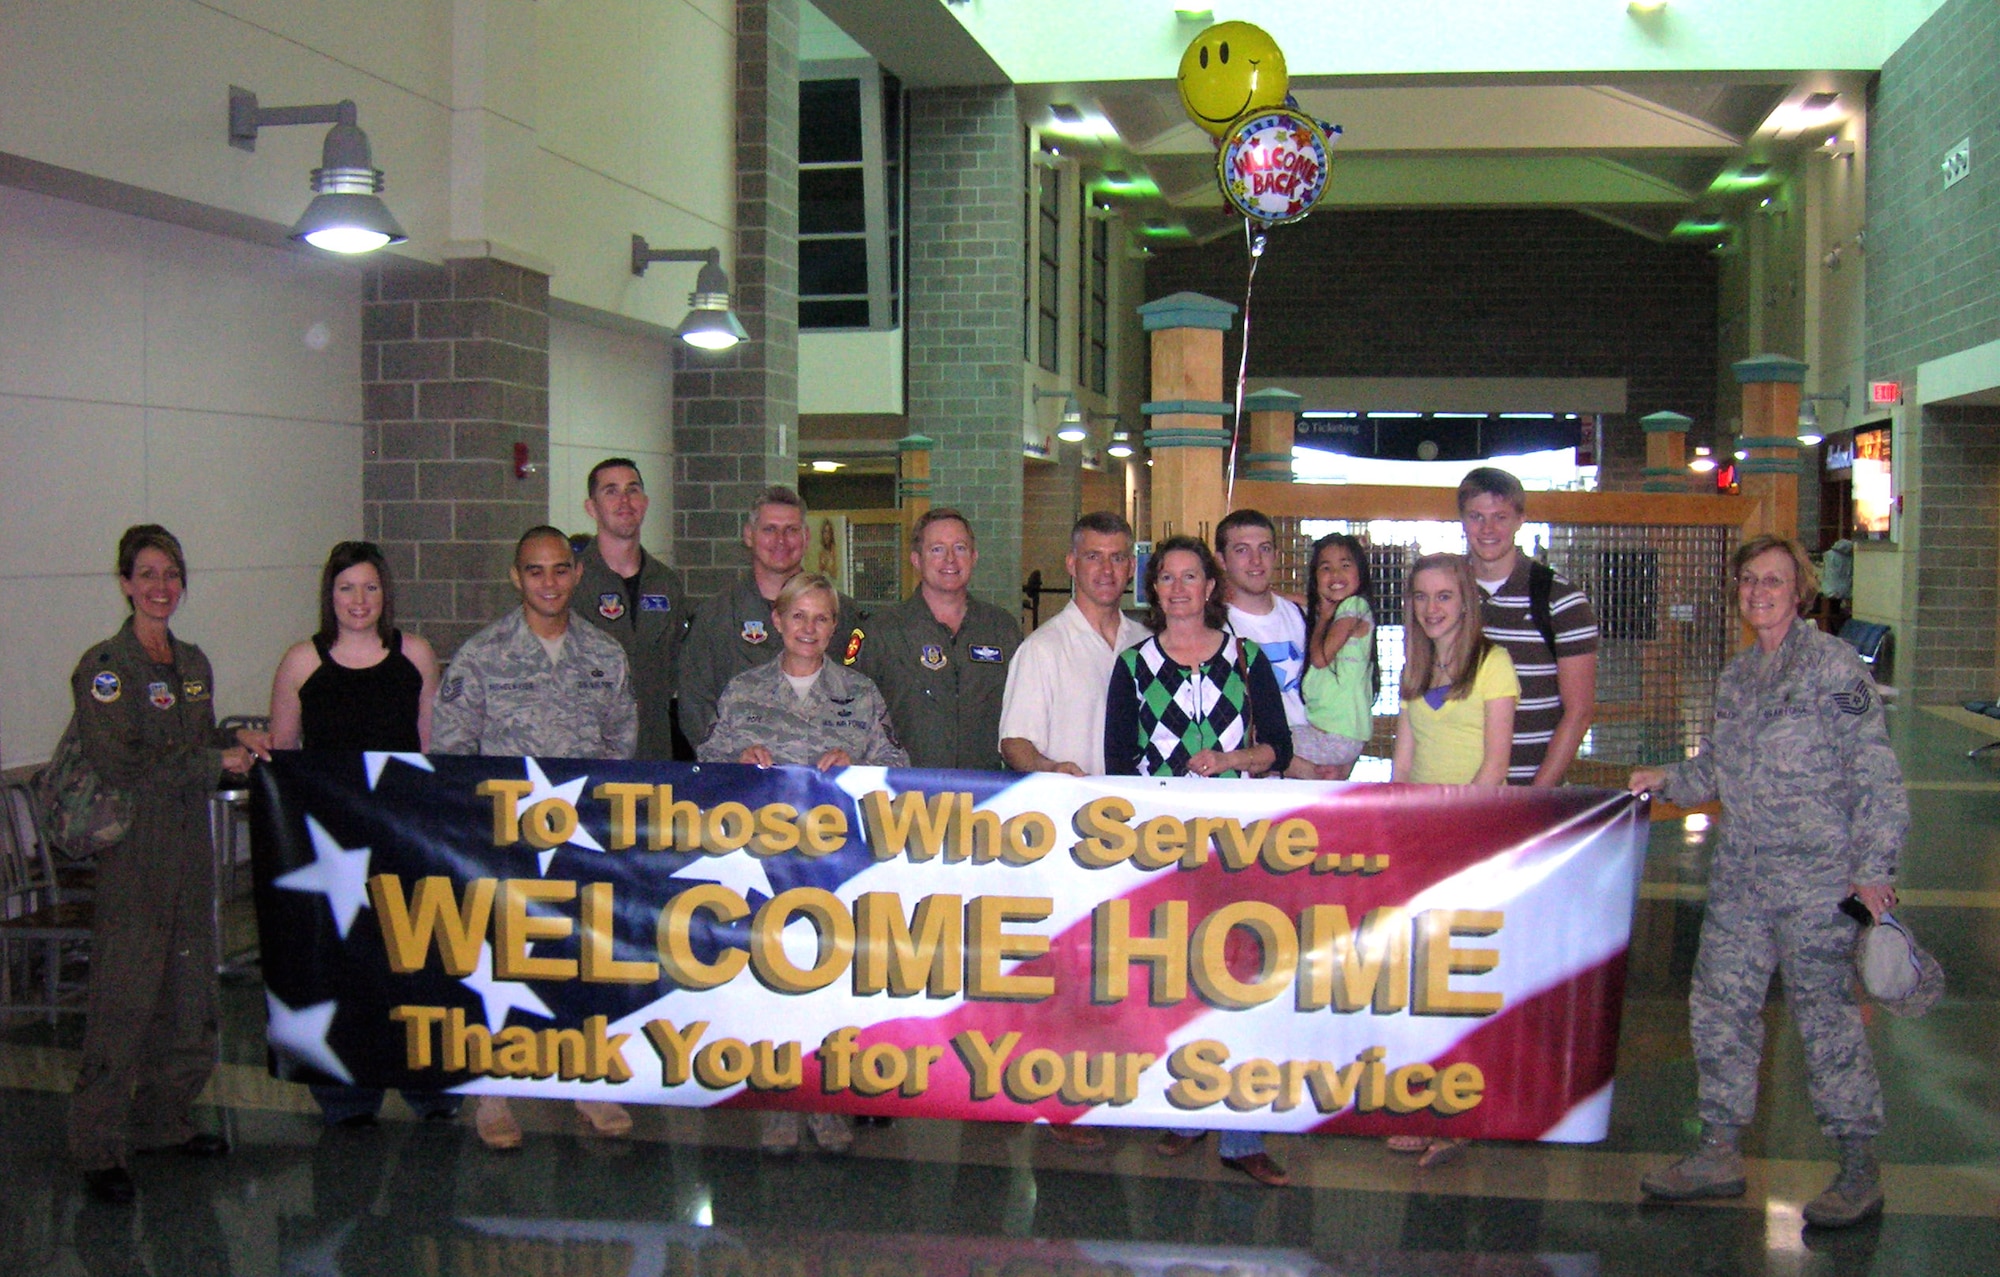 Members of the 706th Fighter Squadron Detachment 1, Hurlburt Field, Fla., wait with a new banner at the Northwest Florida Regional Airport to welcome home Lt. Col. Jim Marshall from his six-month tour in Iraq. Colonel Marshall and 706th FS, Det 1 reservists are fully integrated into regular Air Force operations at Hurlburt Field. The welcome home banner is planned to be erected in the airport lobby. "The civilian-military ties in the Fort Walton Beach area are exceptional, and this banner is merely one example of the extraordinary support the local community here gives its military population" said Lt. Col. Patrick Ryan, 706th FS, Det 1 commander.